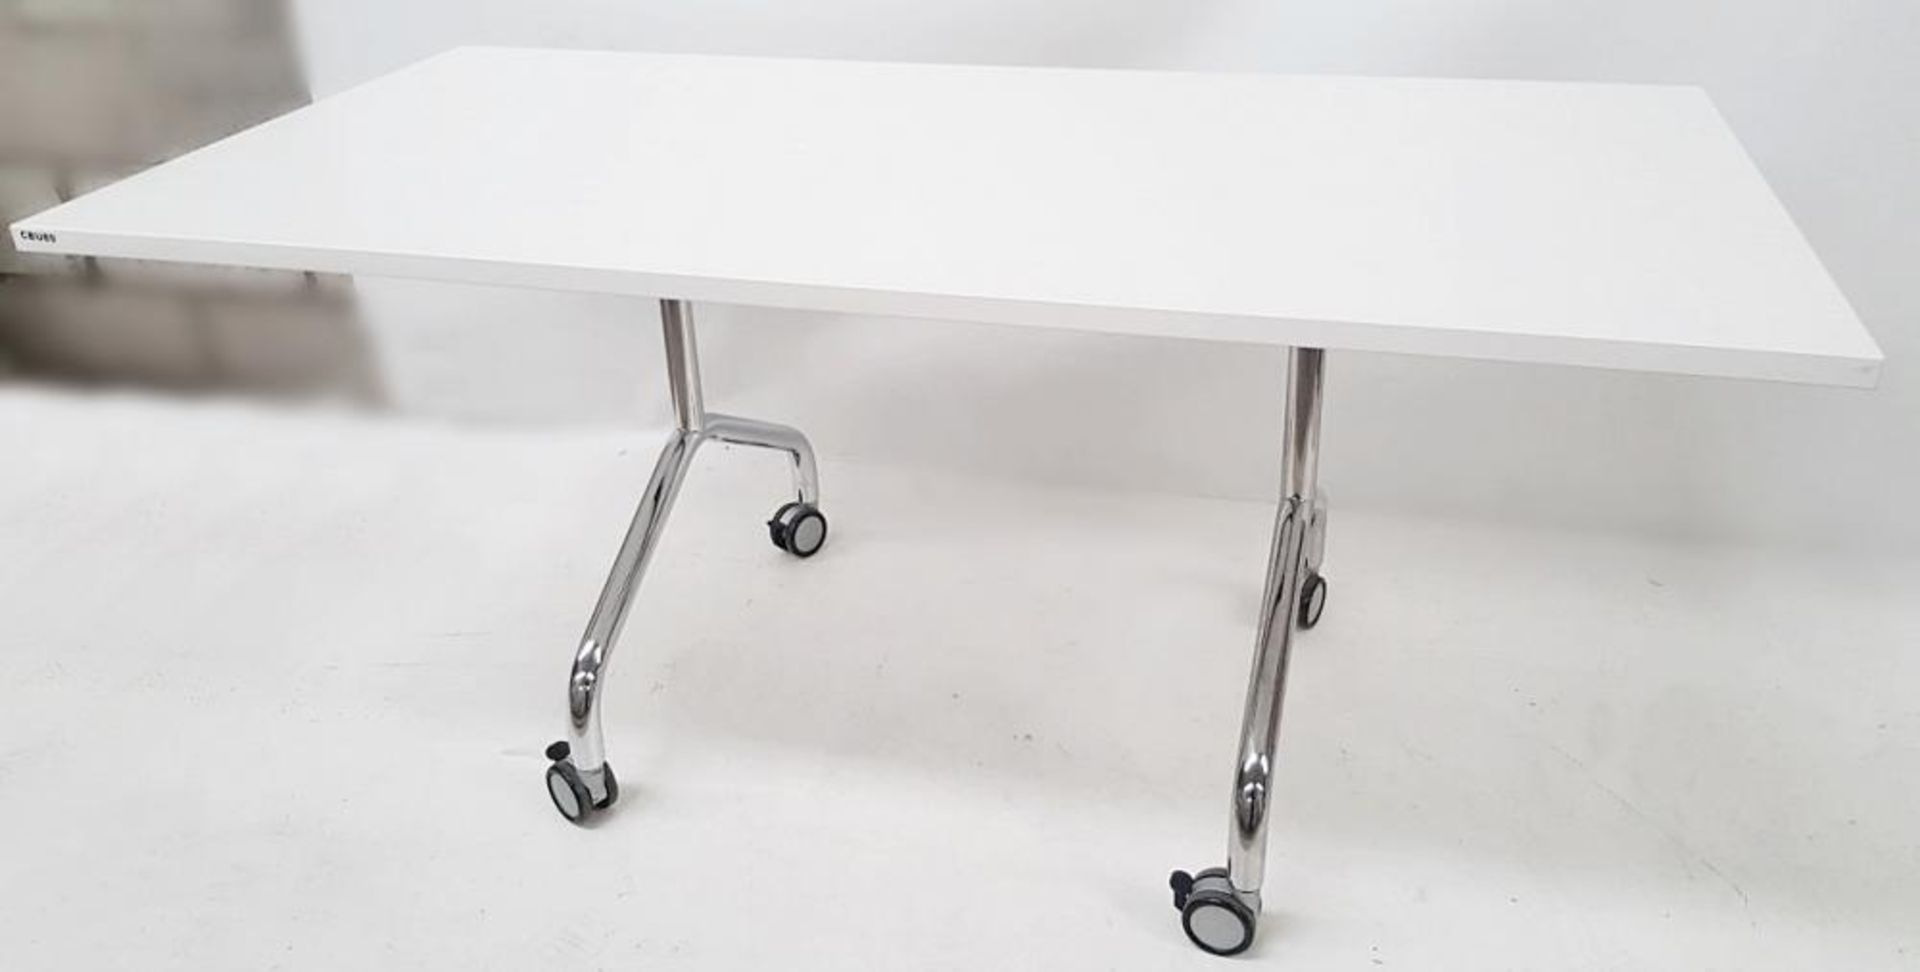 1 x Large Premium Office Table With Folding Top - Colour: Brilliant White With Chrome Legs - Dimensi